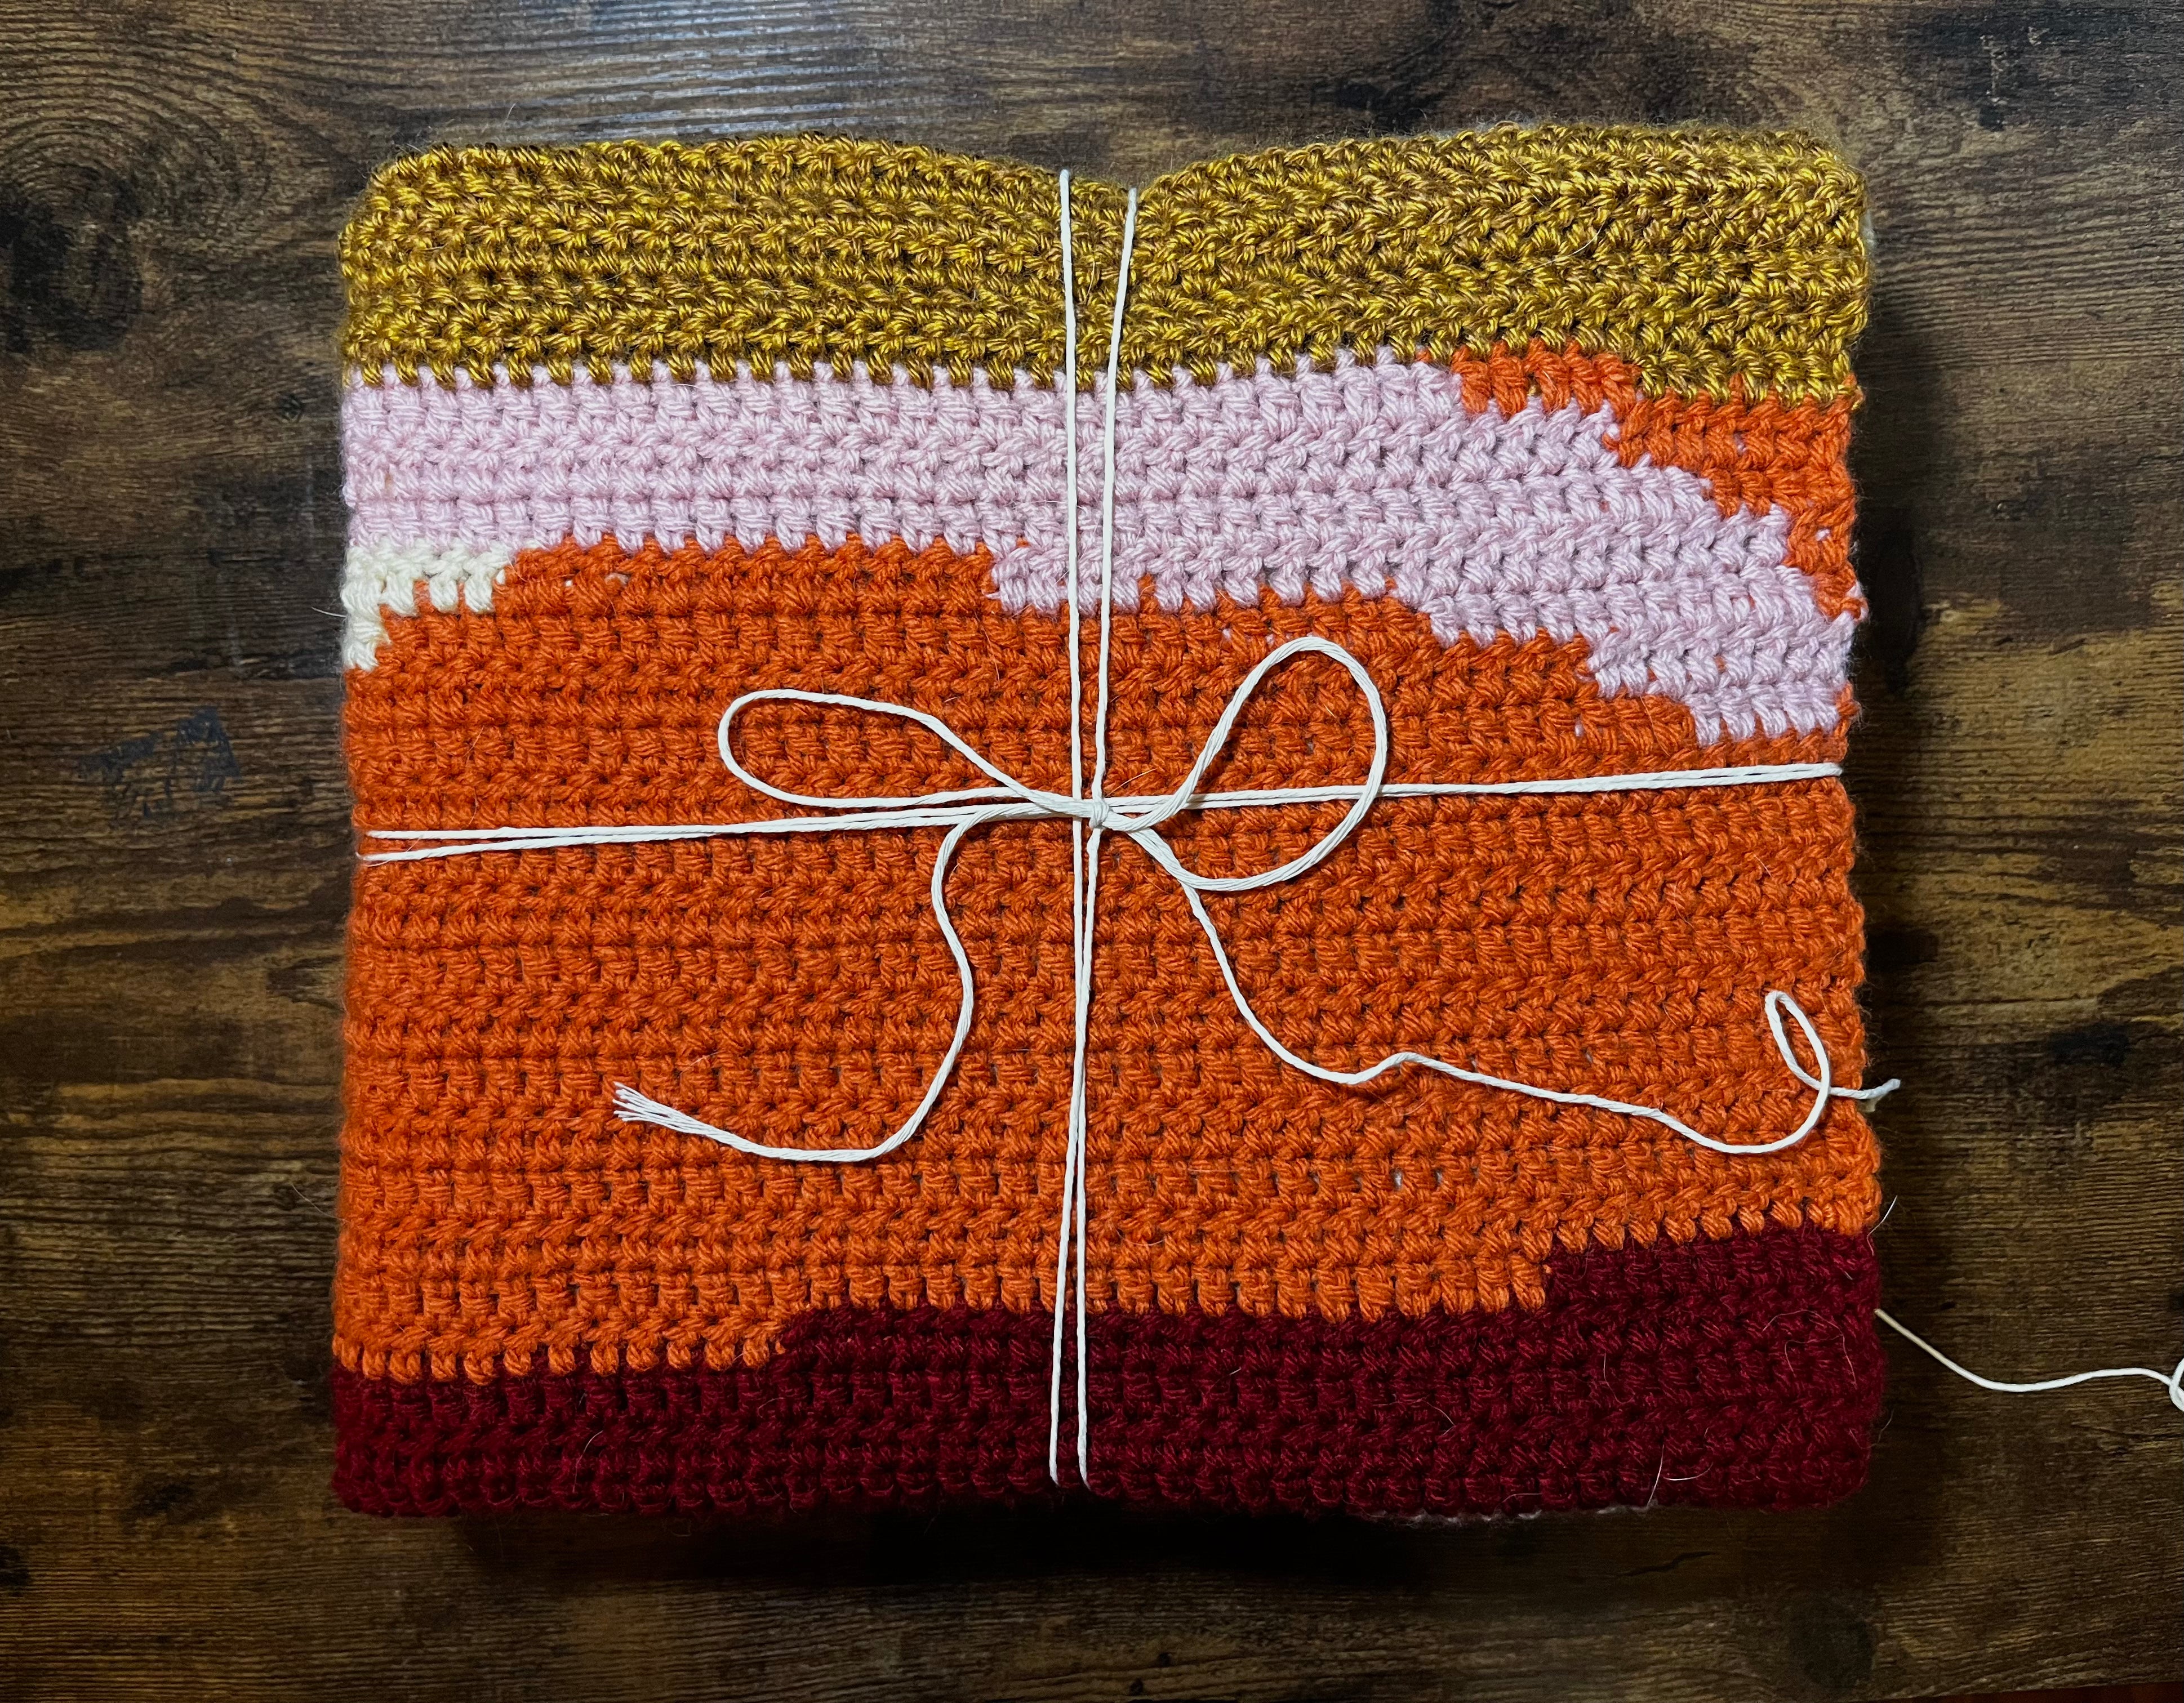 Folded crochet blanket with uneven stripes of orange, burgundy, pink, and gold.